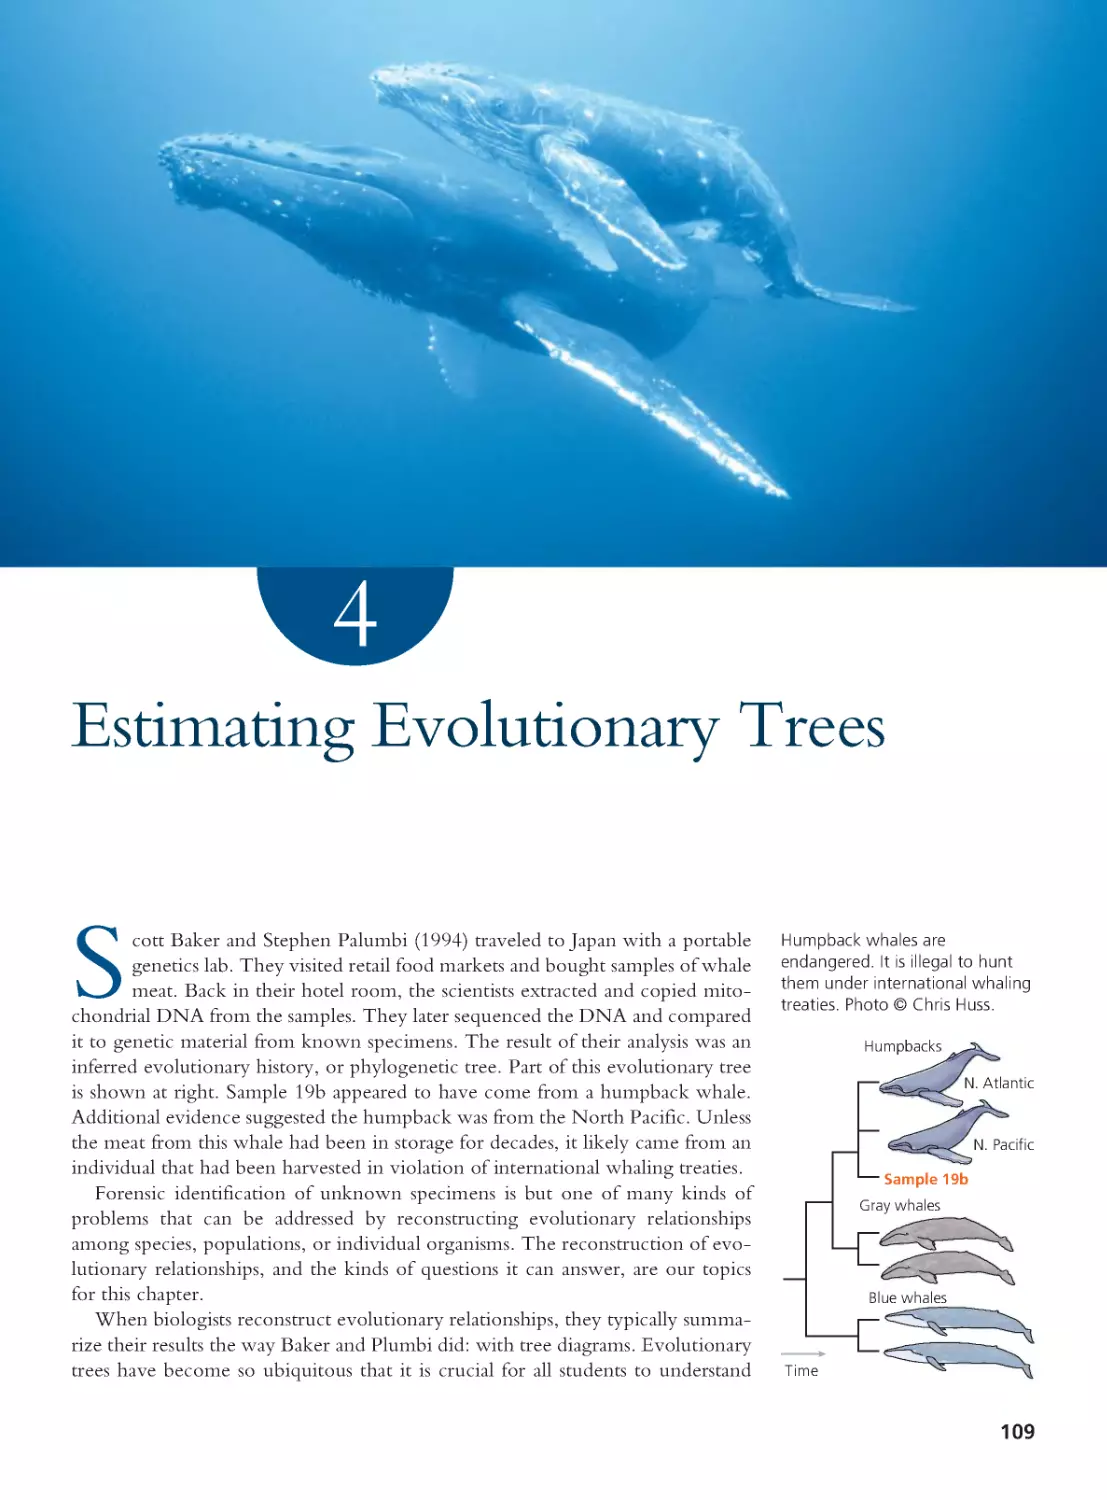 CHAPTER 4 Estimating Evolutionary Trees